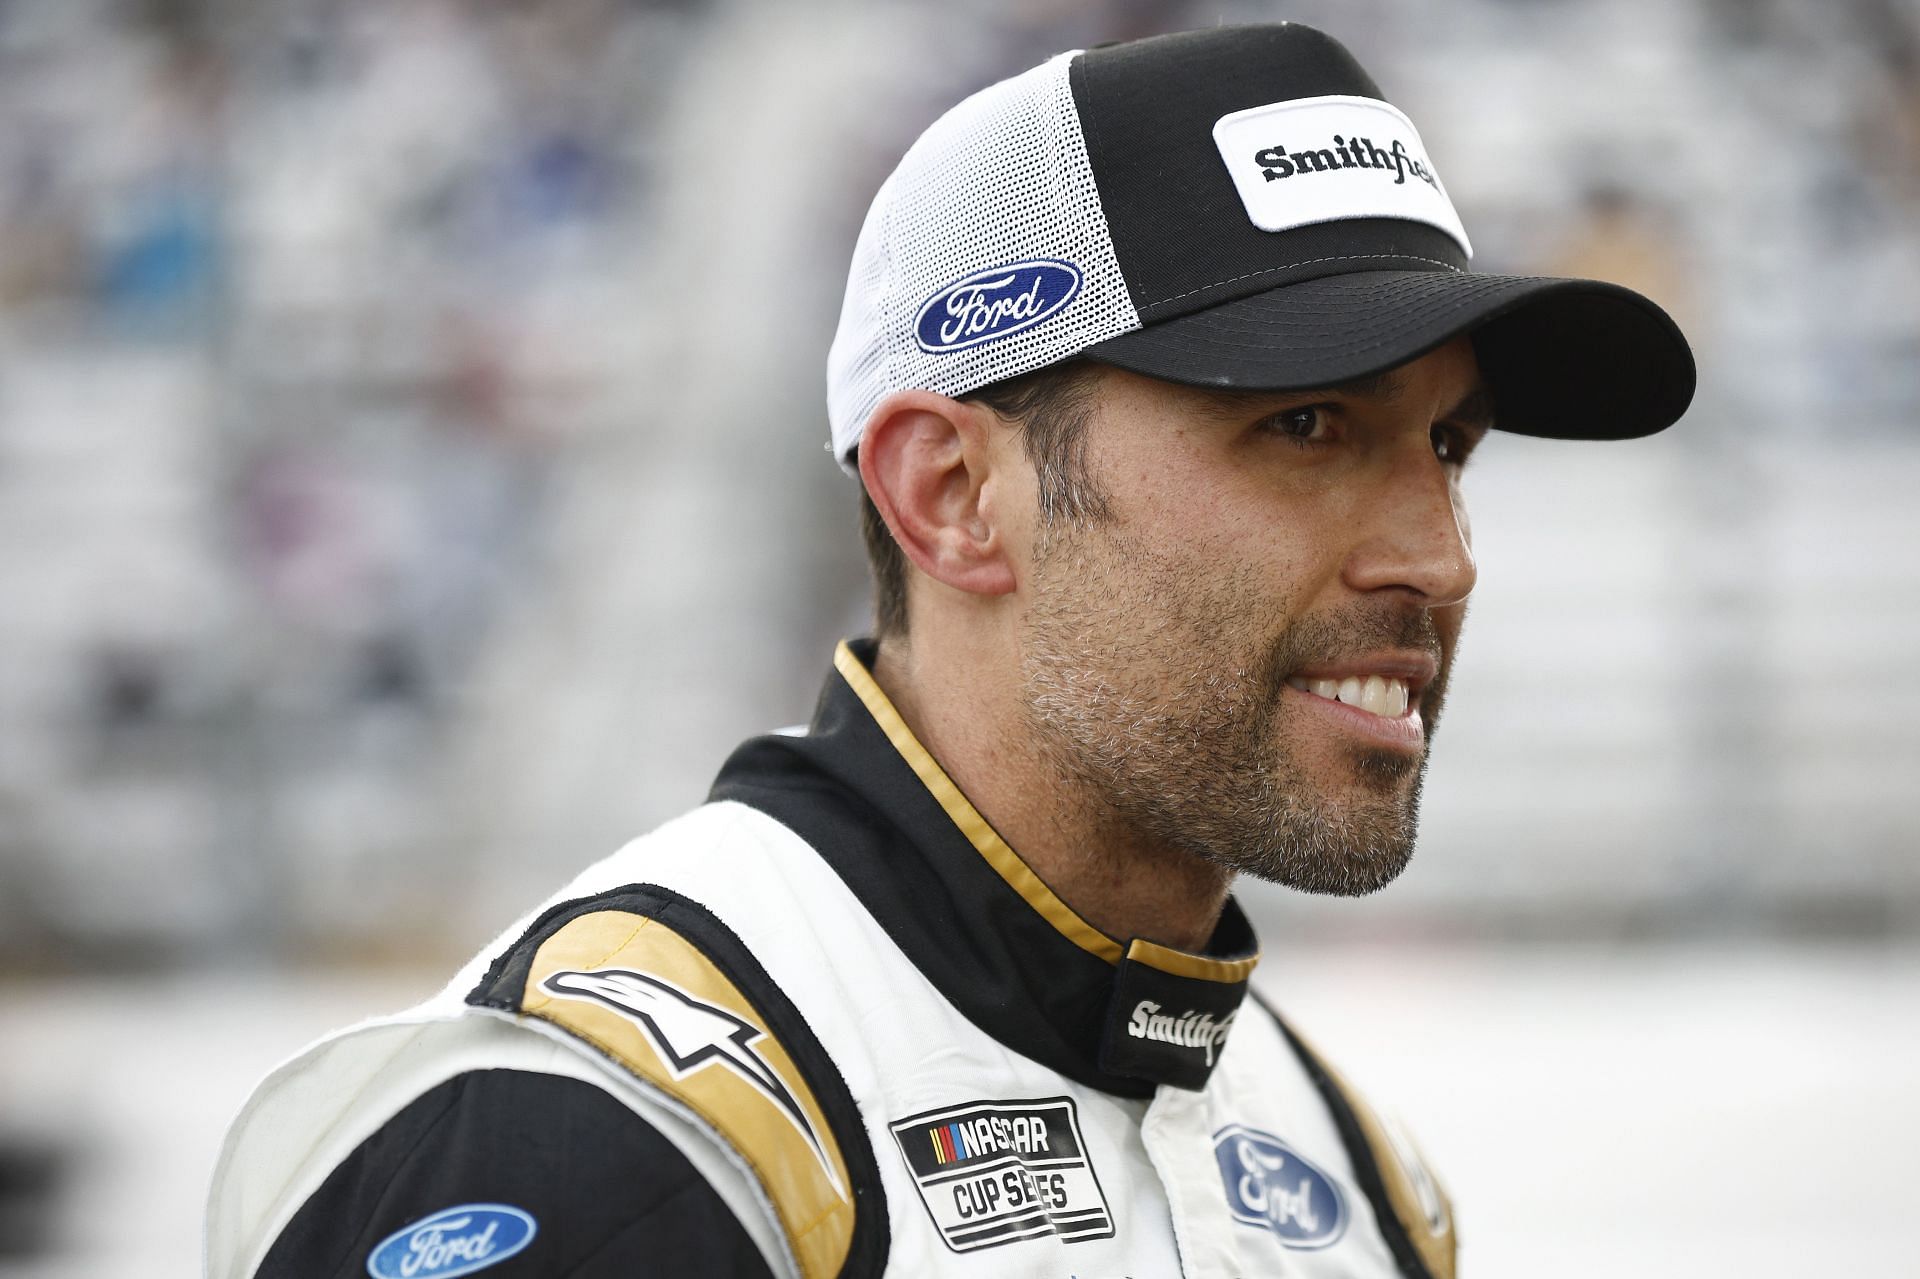 Aric Almirola looks on during qualifying for the NASCAR Cup Series Blue-Emu Maximum Pain Relief 400 at Martinsville Speedway. (Photo by Jared C. Tilton/Getty Images)